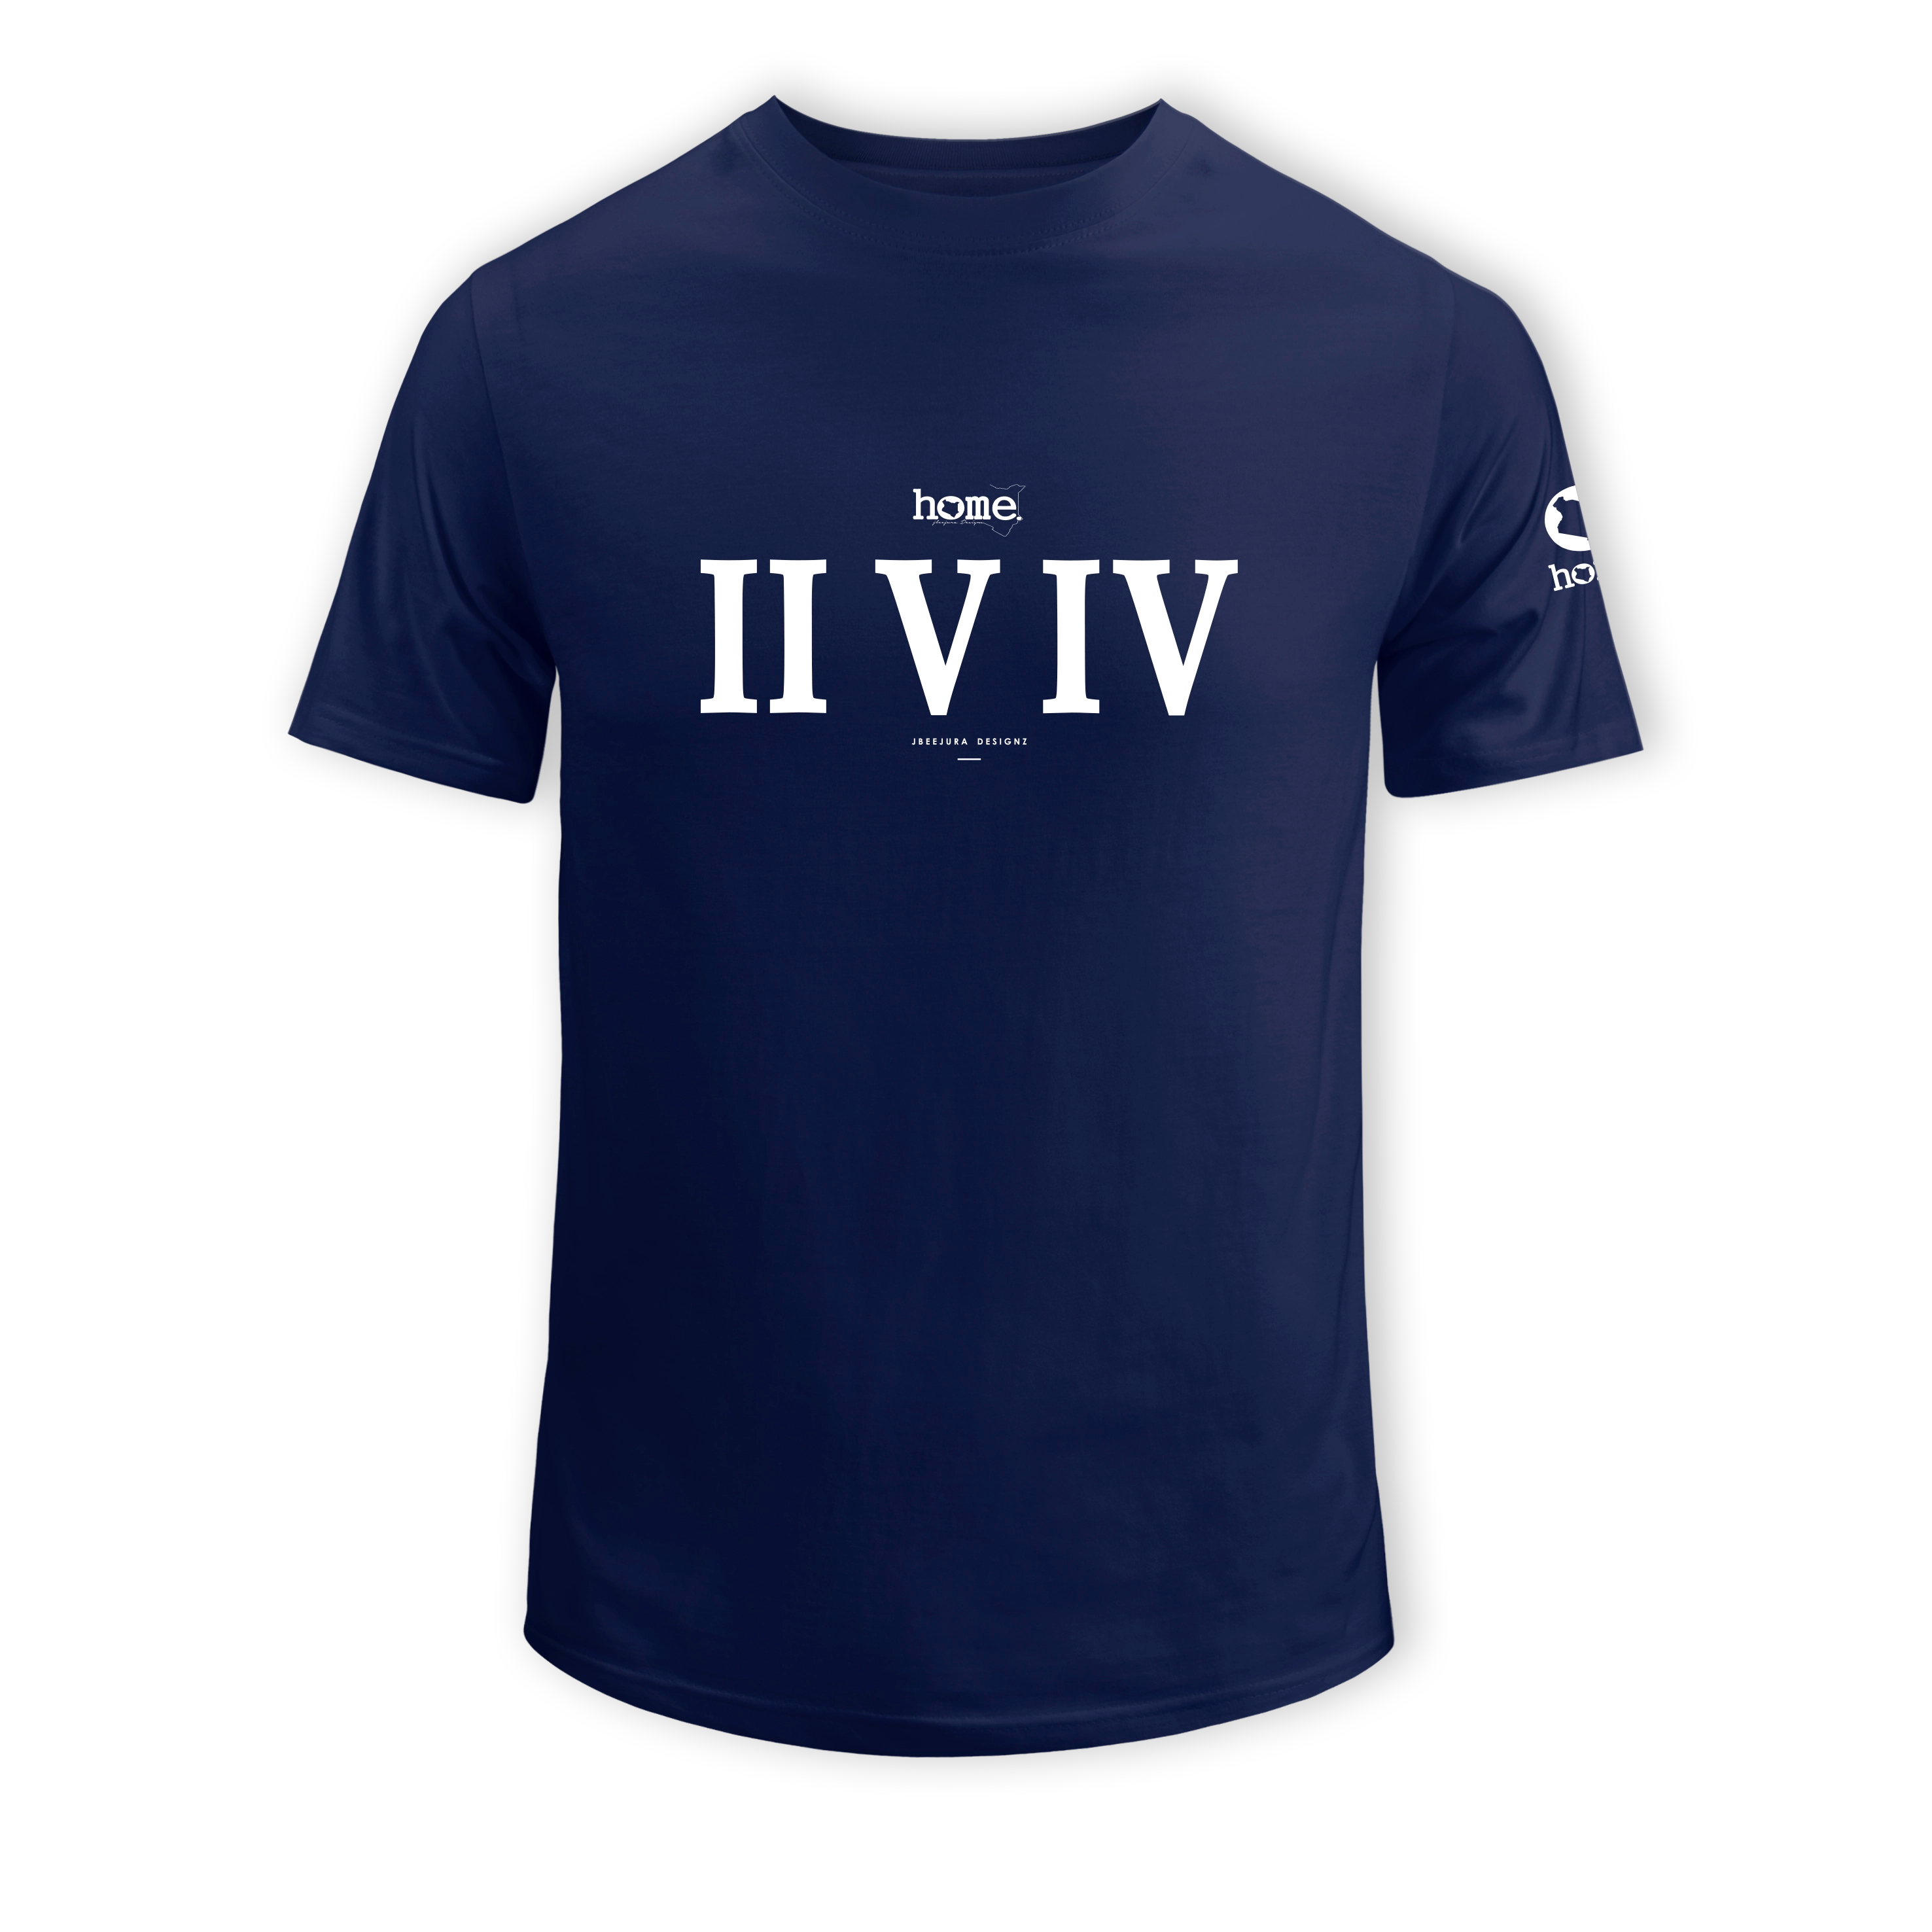 home_254 SHORT-SLEEVED NAVY BLUE T-SHIRT WITH A WHITE ROMAN NUMERALS PRINT – COTTON PLUS FABRIC